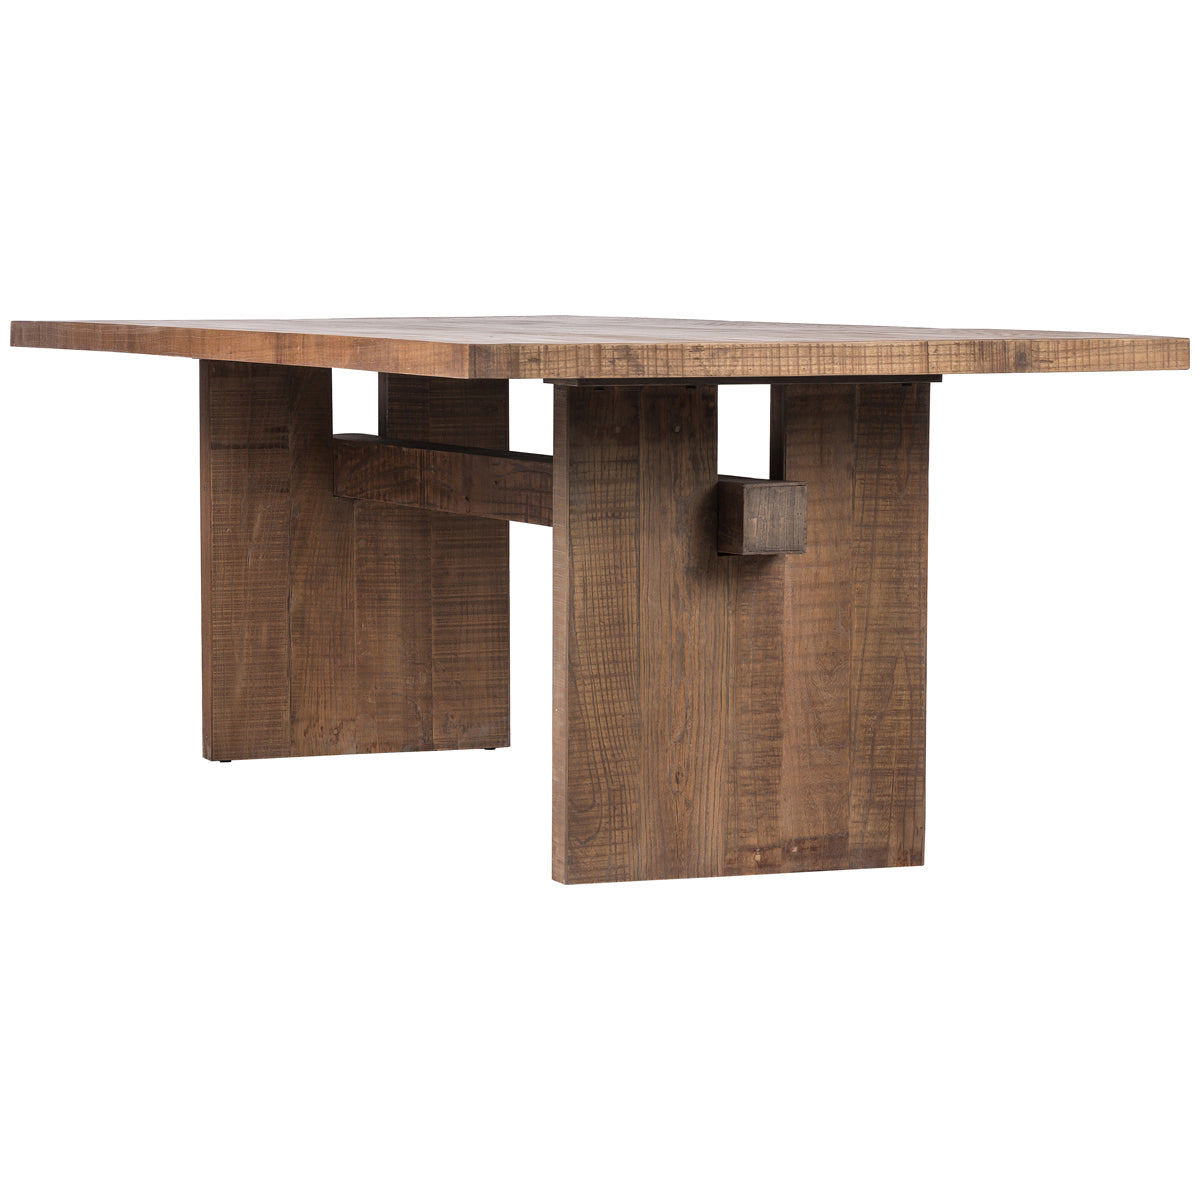 Four Hands Westgate Brandy Dining Table - Rustic Weathered Elm